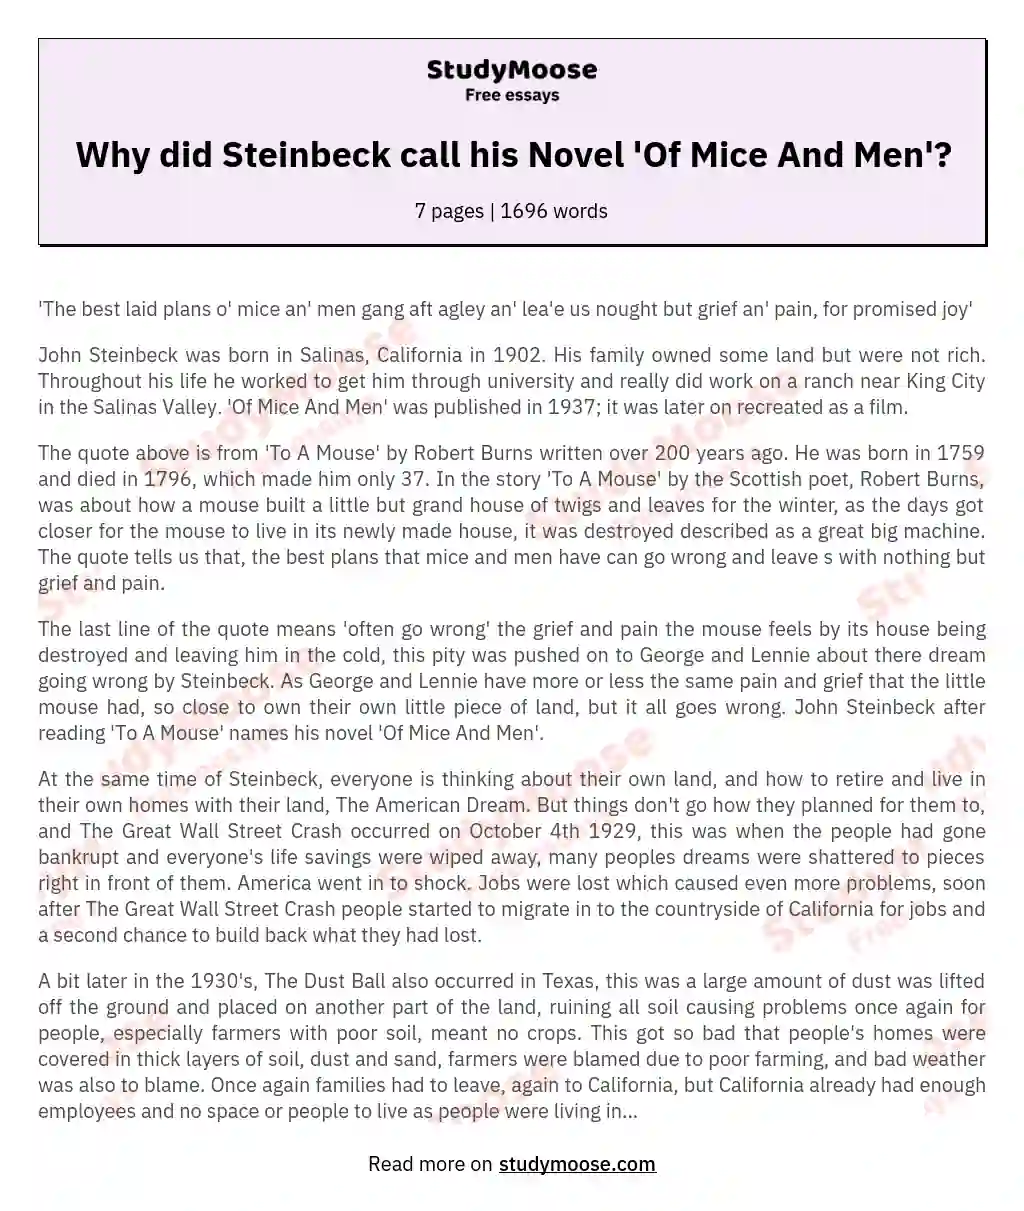 Why did Steinbeck call his Novel 'Of Mice And Men'?